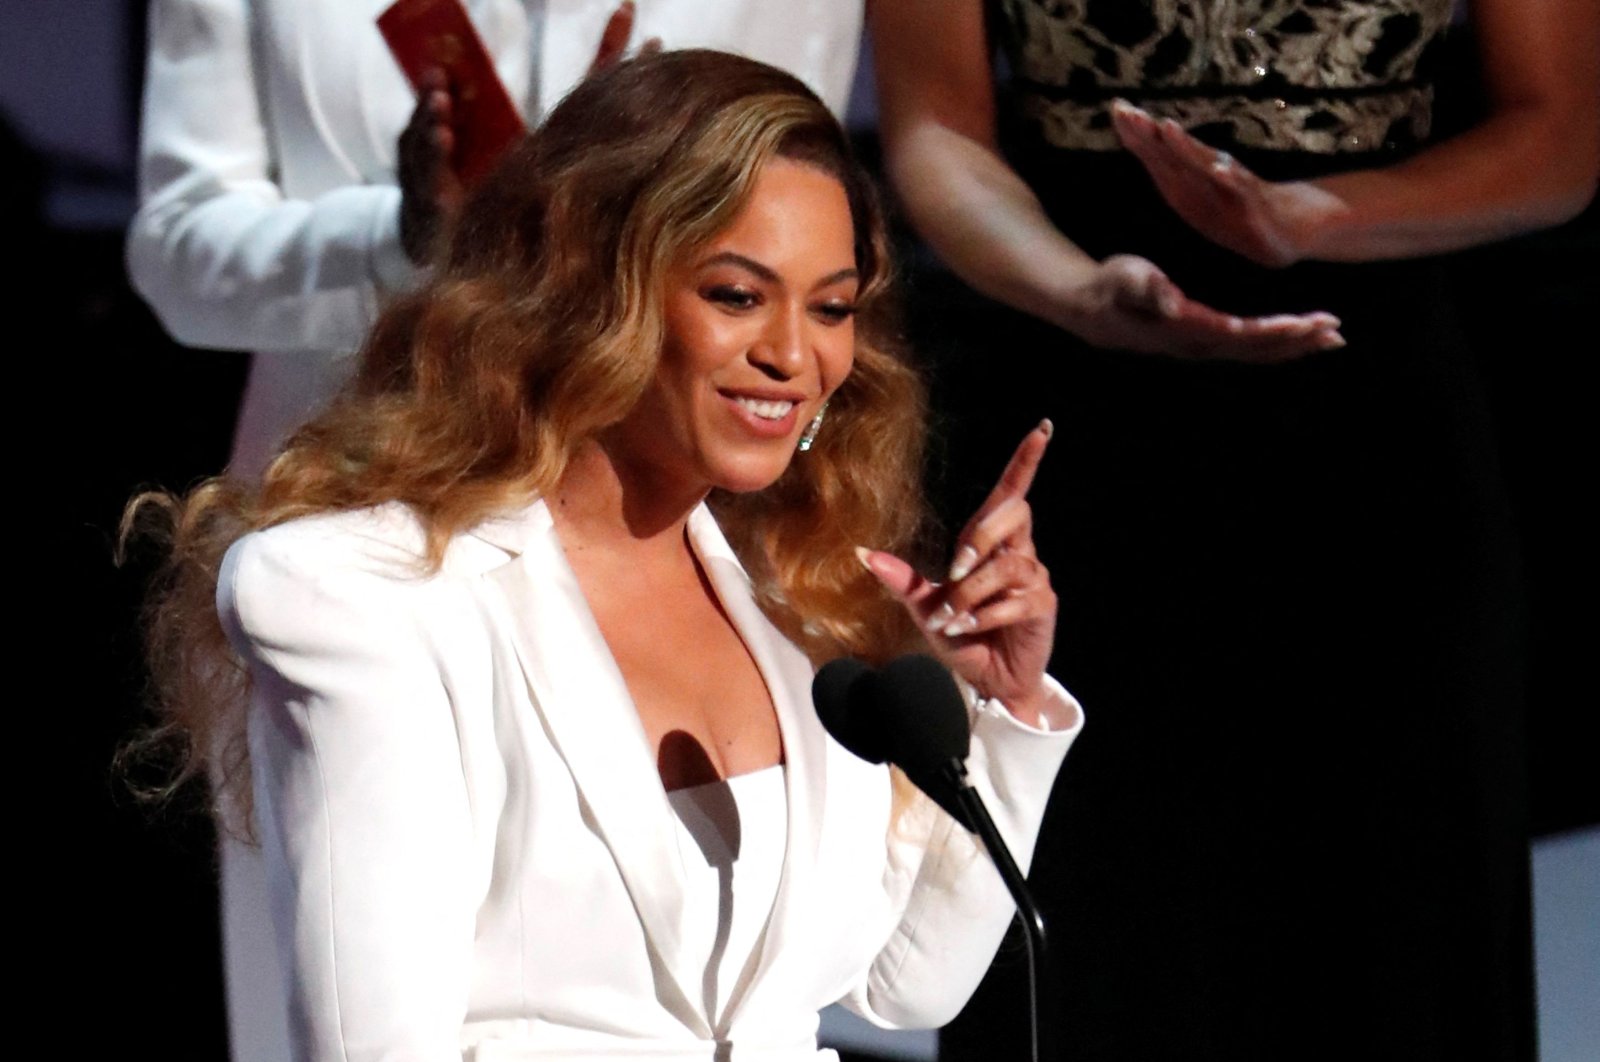 Beyonce reacts after winning the entertainer of the year award at the 50th NAACP Image Awards, Los Angeles, California, U.S., March 30, 2019. (Reuters Photo)